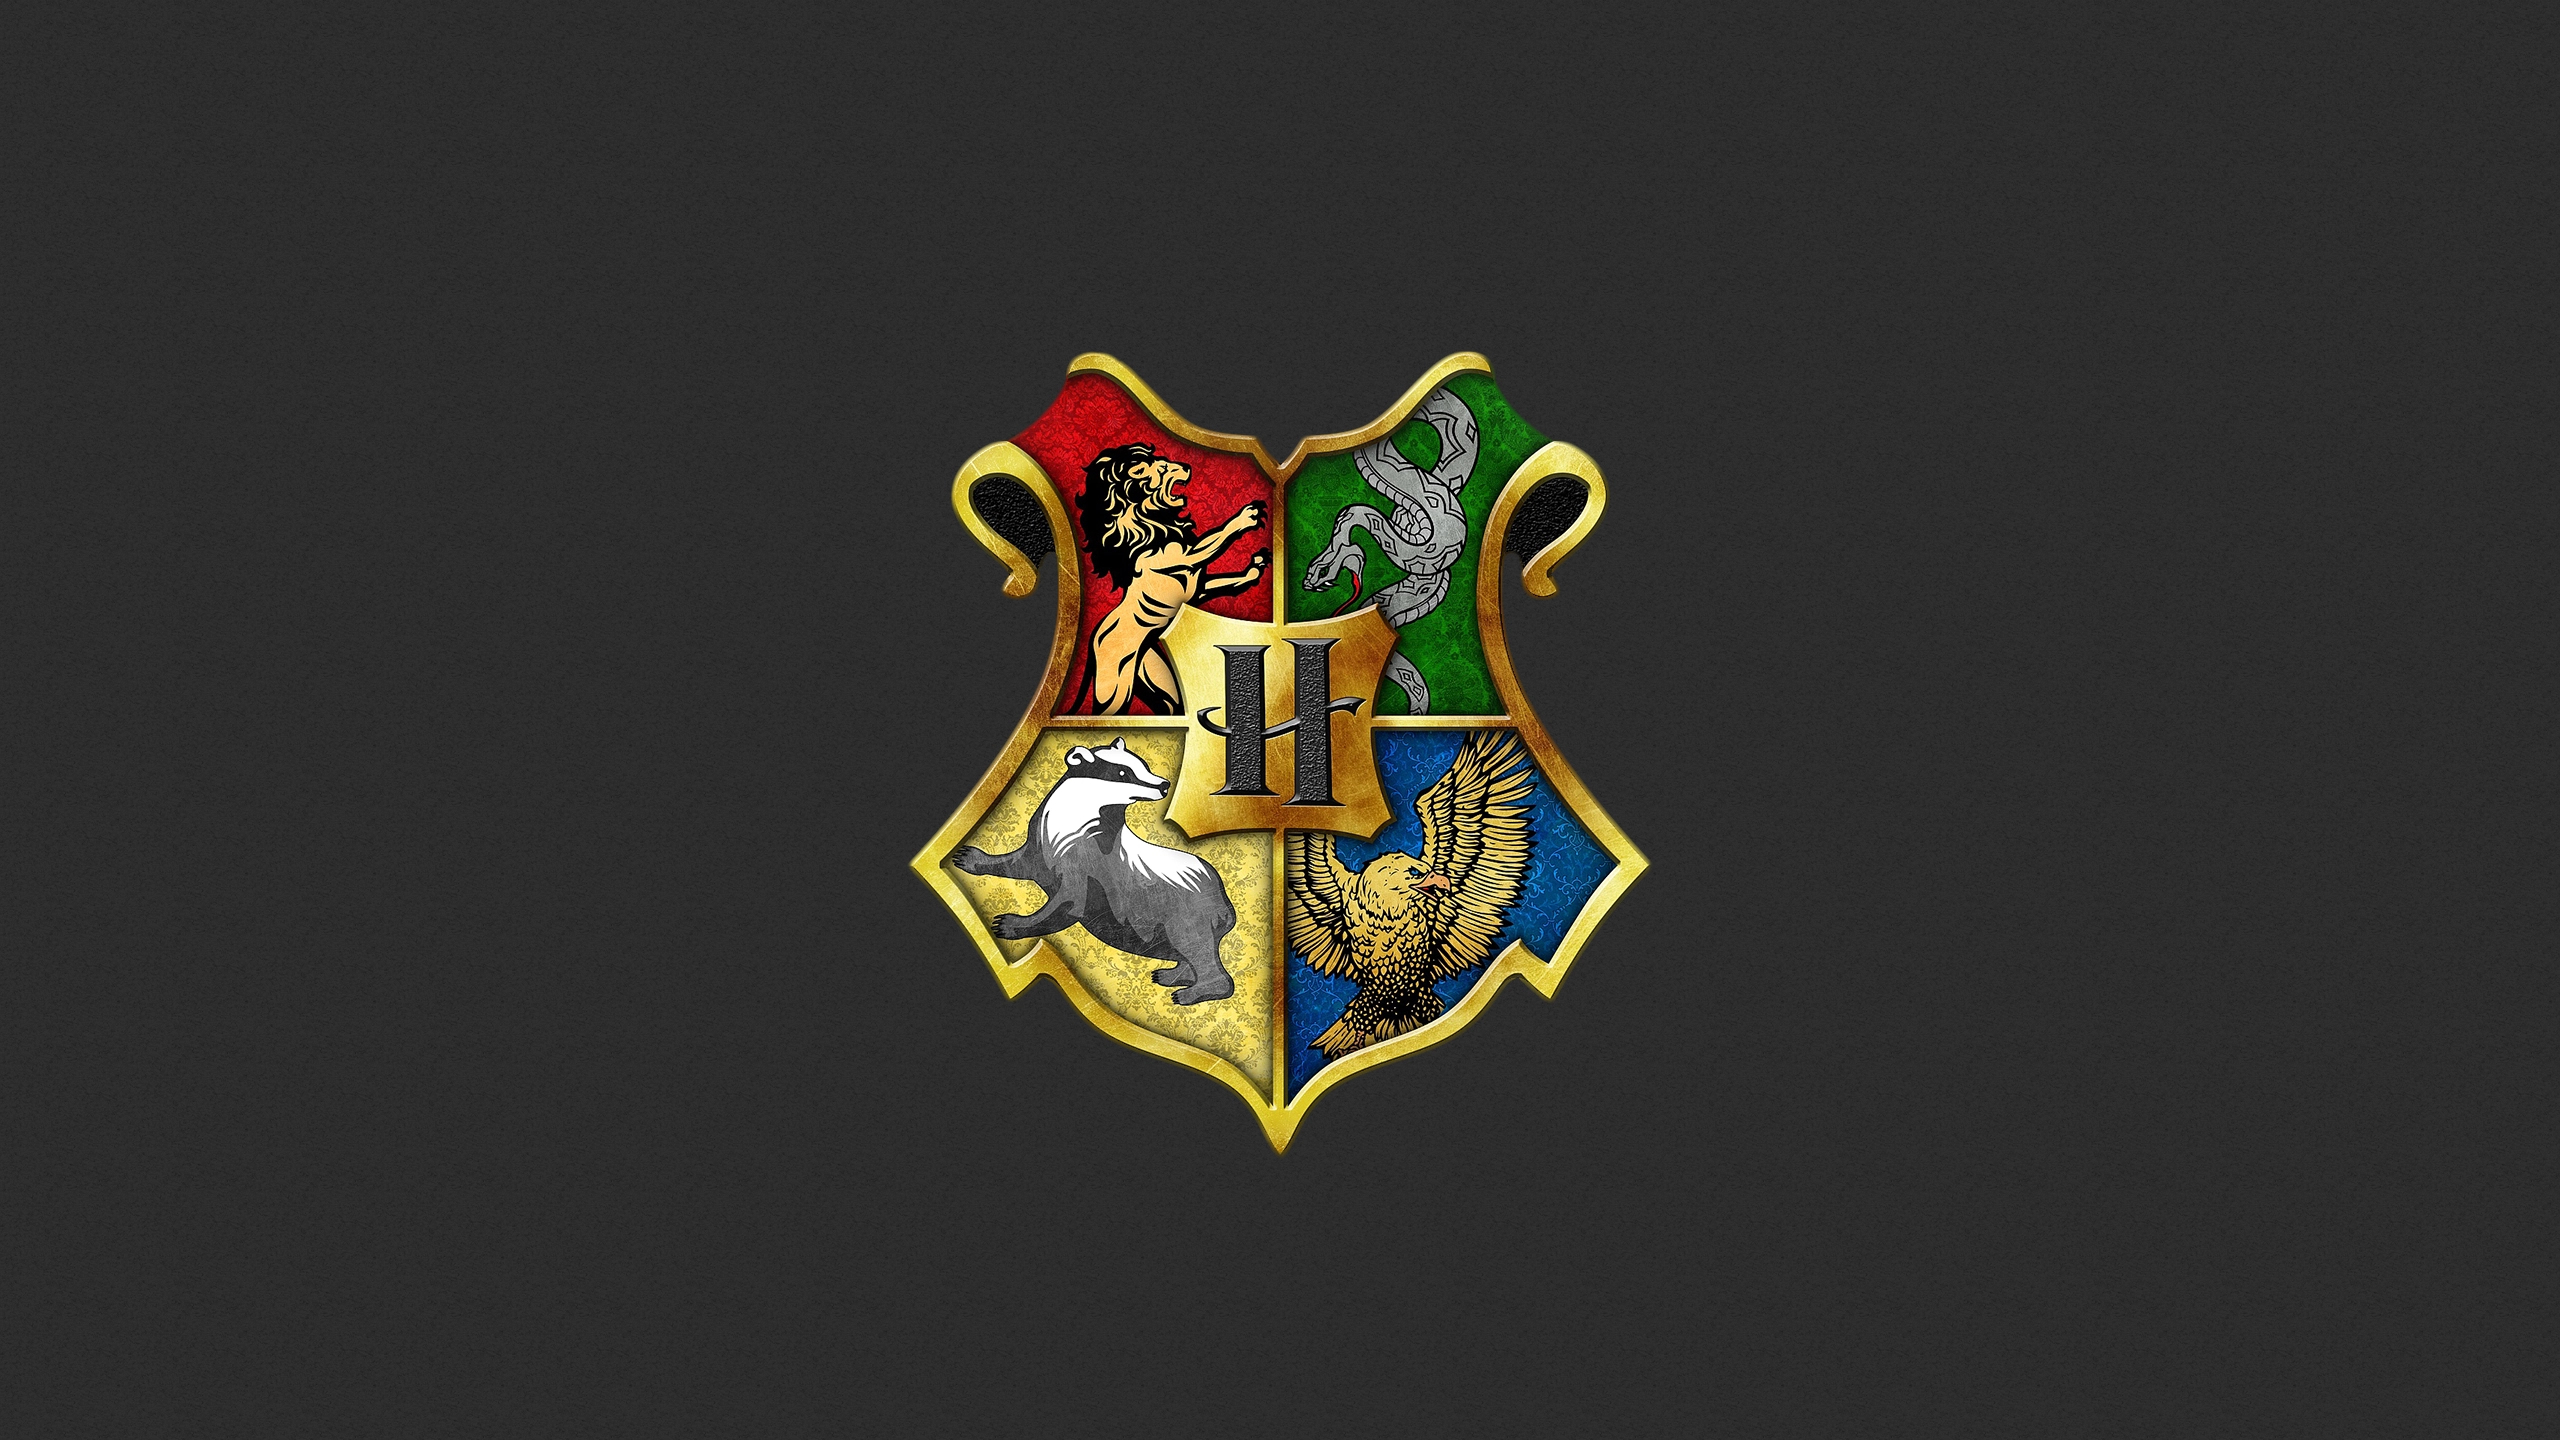 2560x1440 Harry Potter Badges: Gryffindor, Slytherin, Hufflepuff and Ravenclaw Wallpaper 2k Quad HD ID:3548